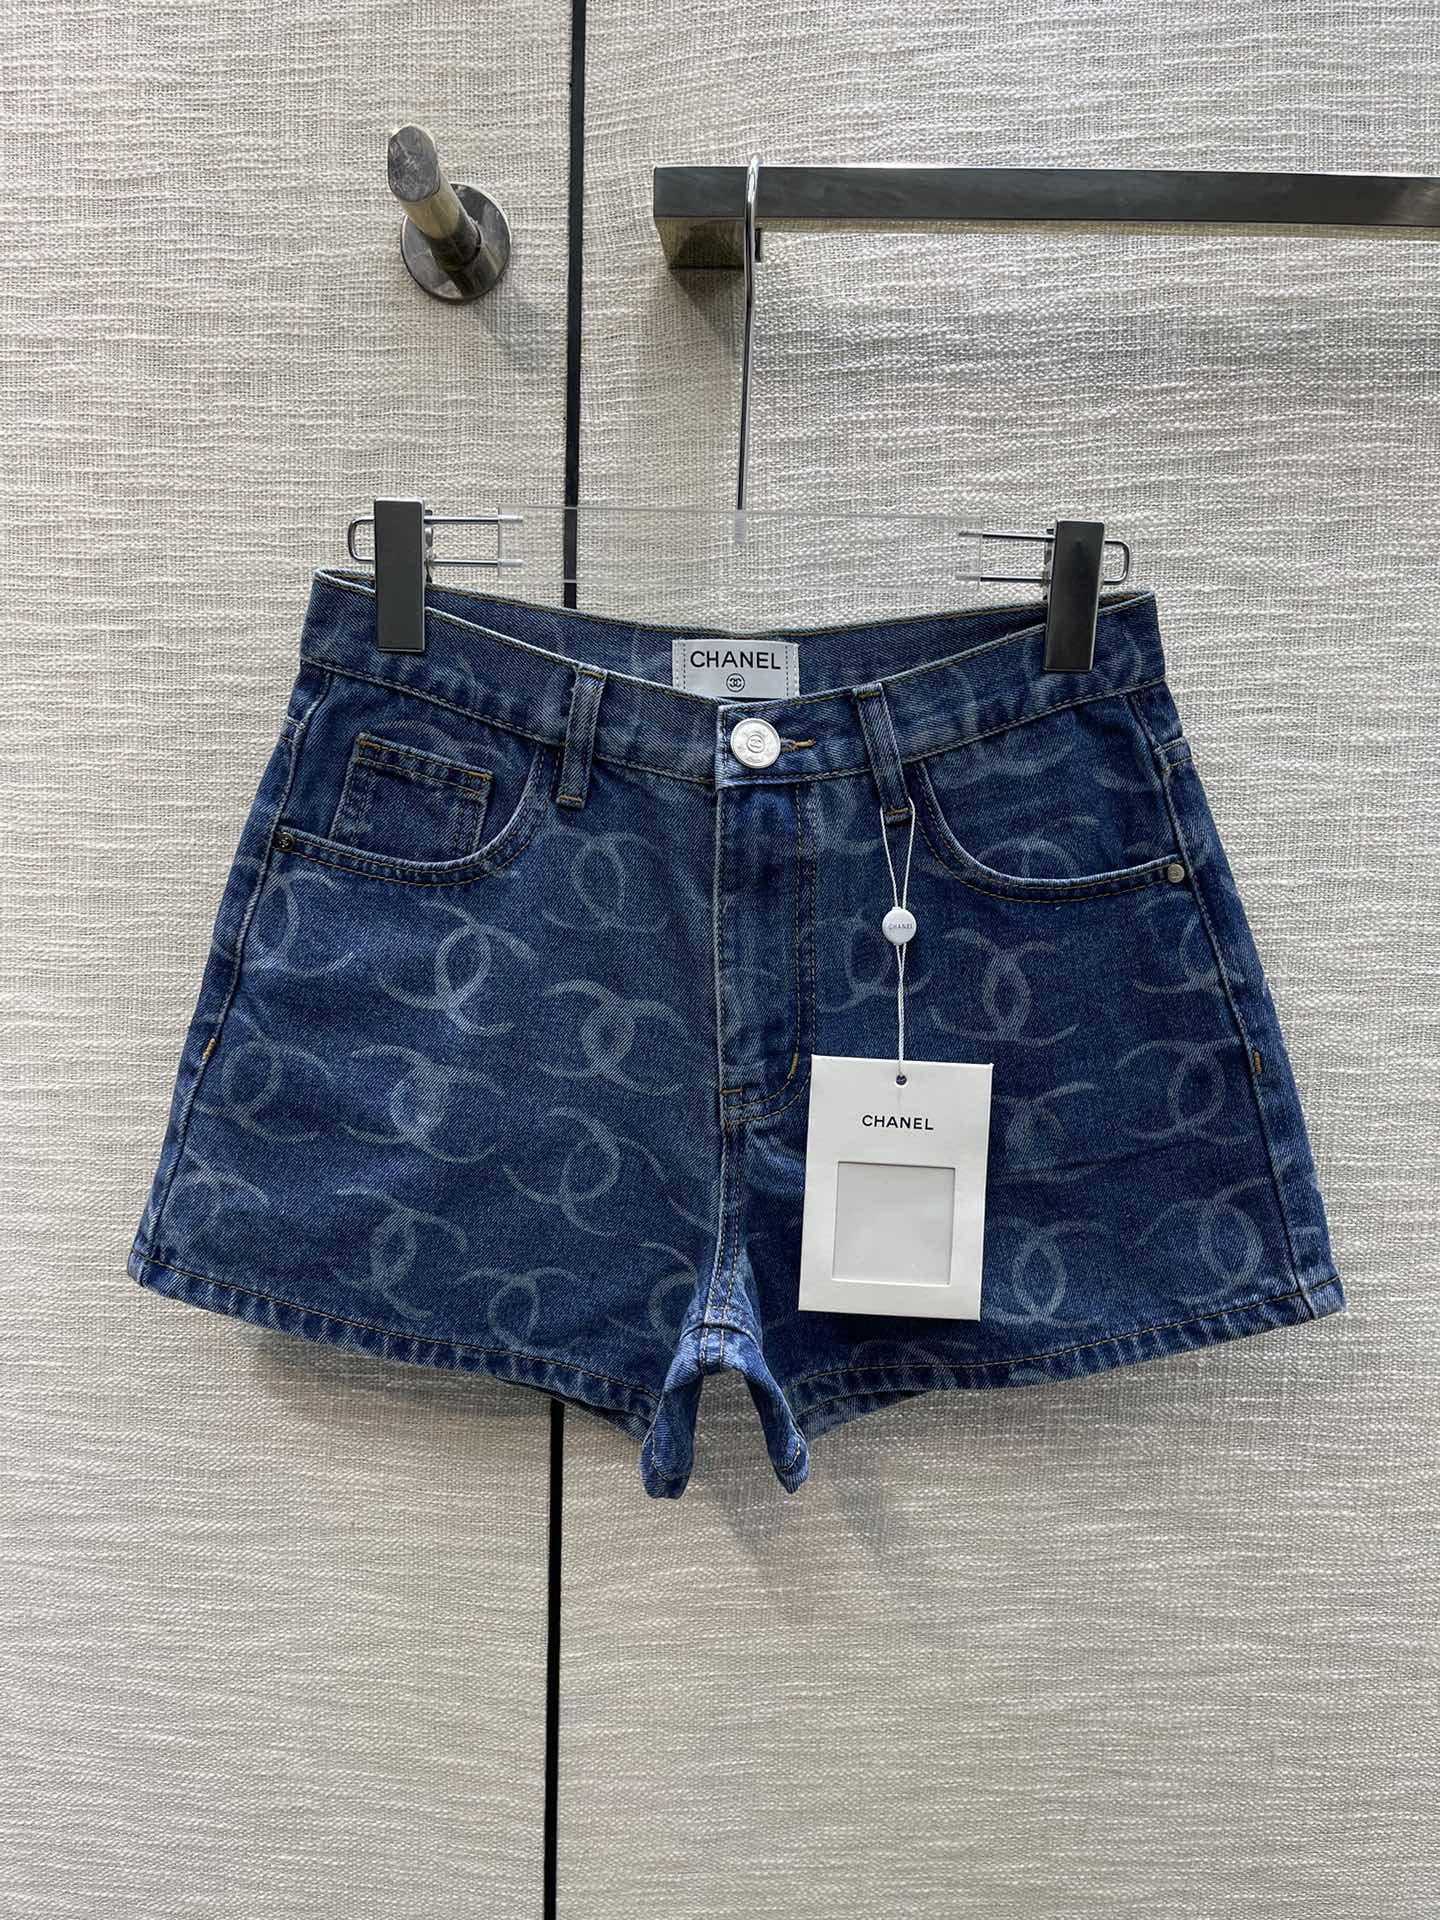 Best Fake
 Chanel Clothing Jeans Shorts Denim Spring Collection